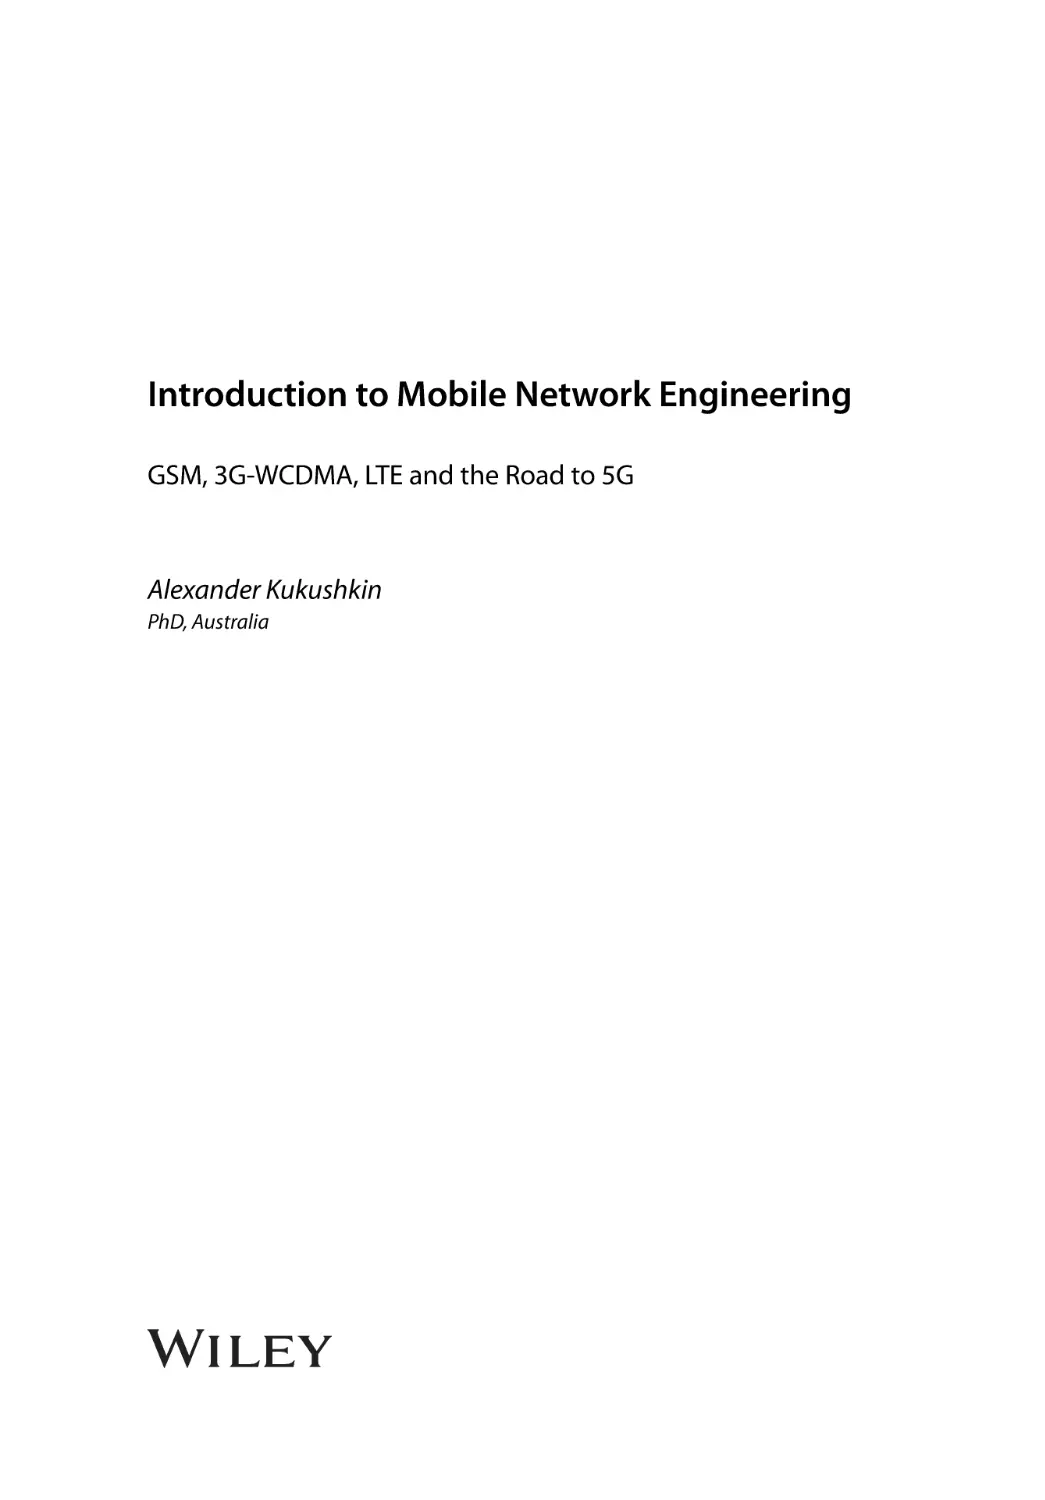 Introduction toMobile Network Engineering